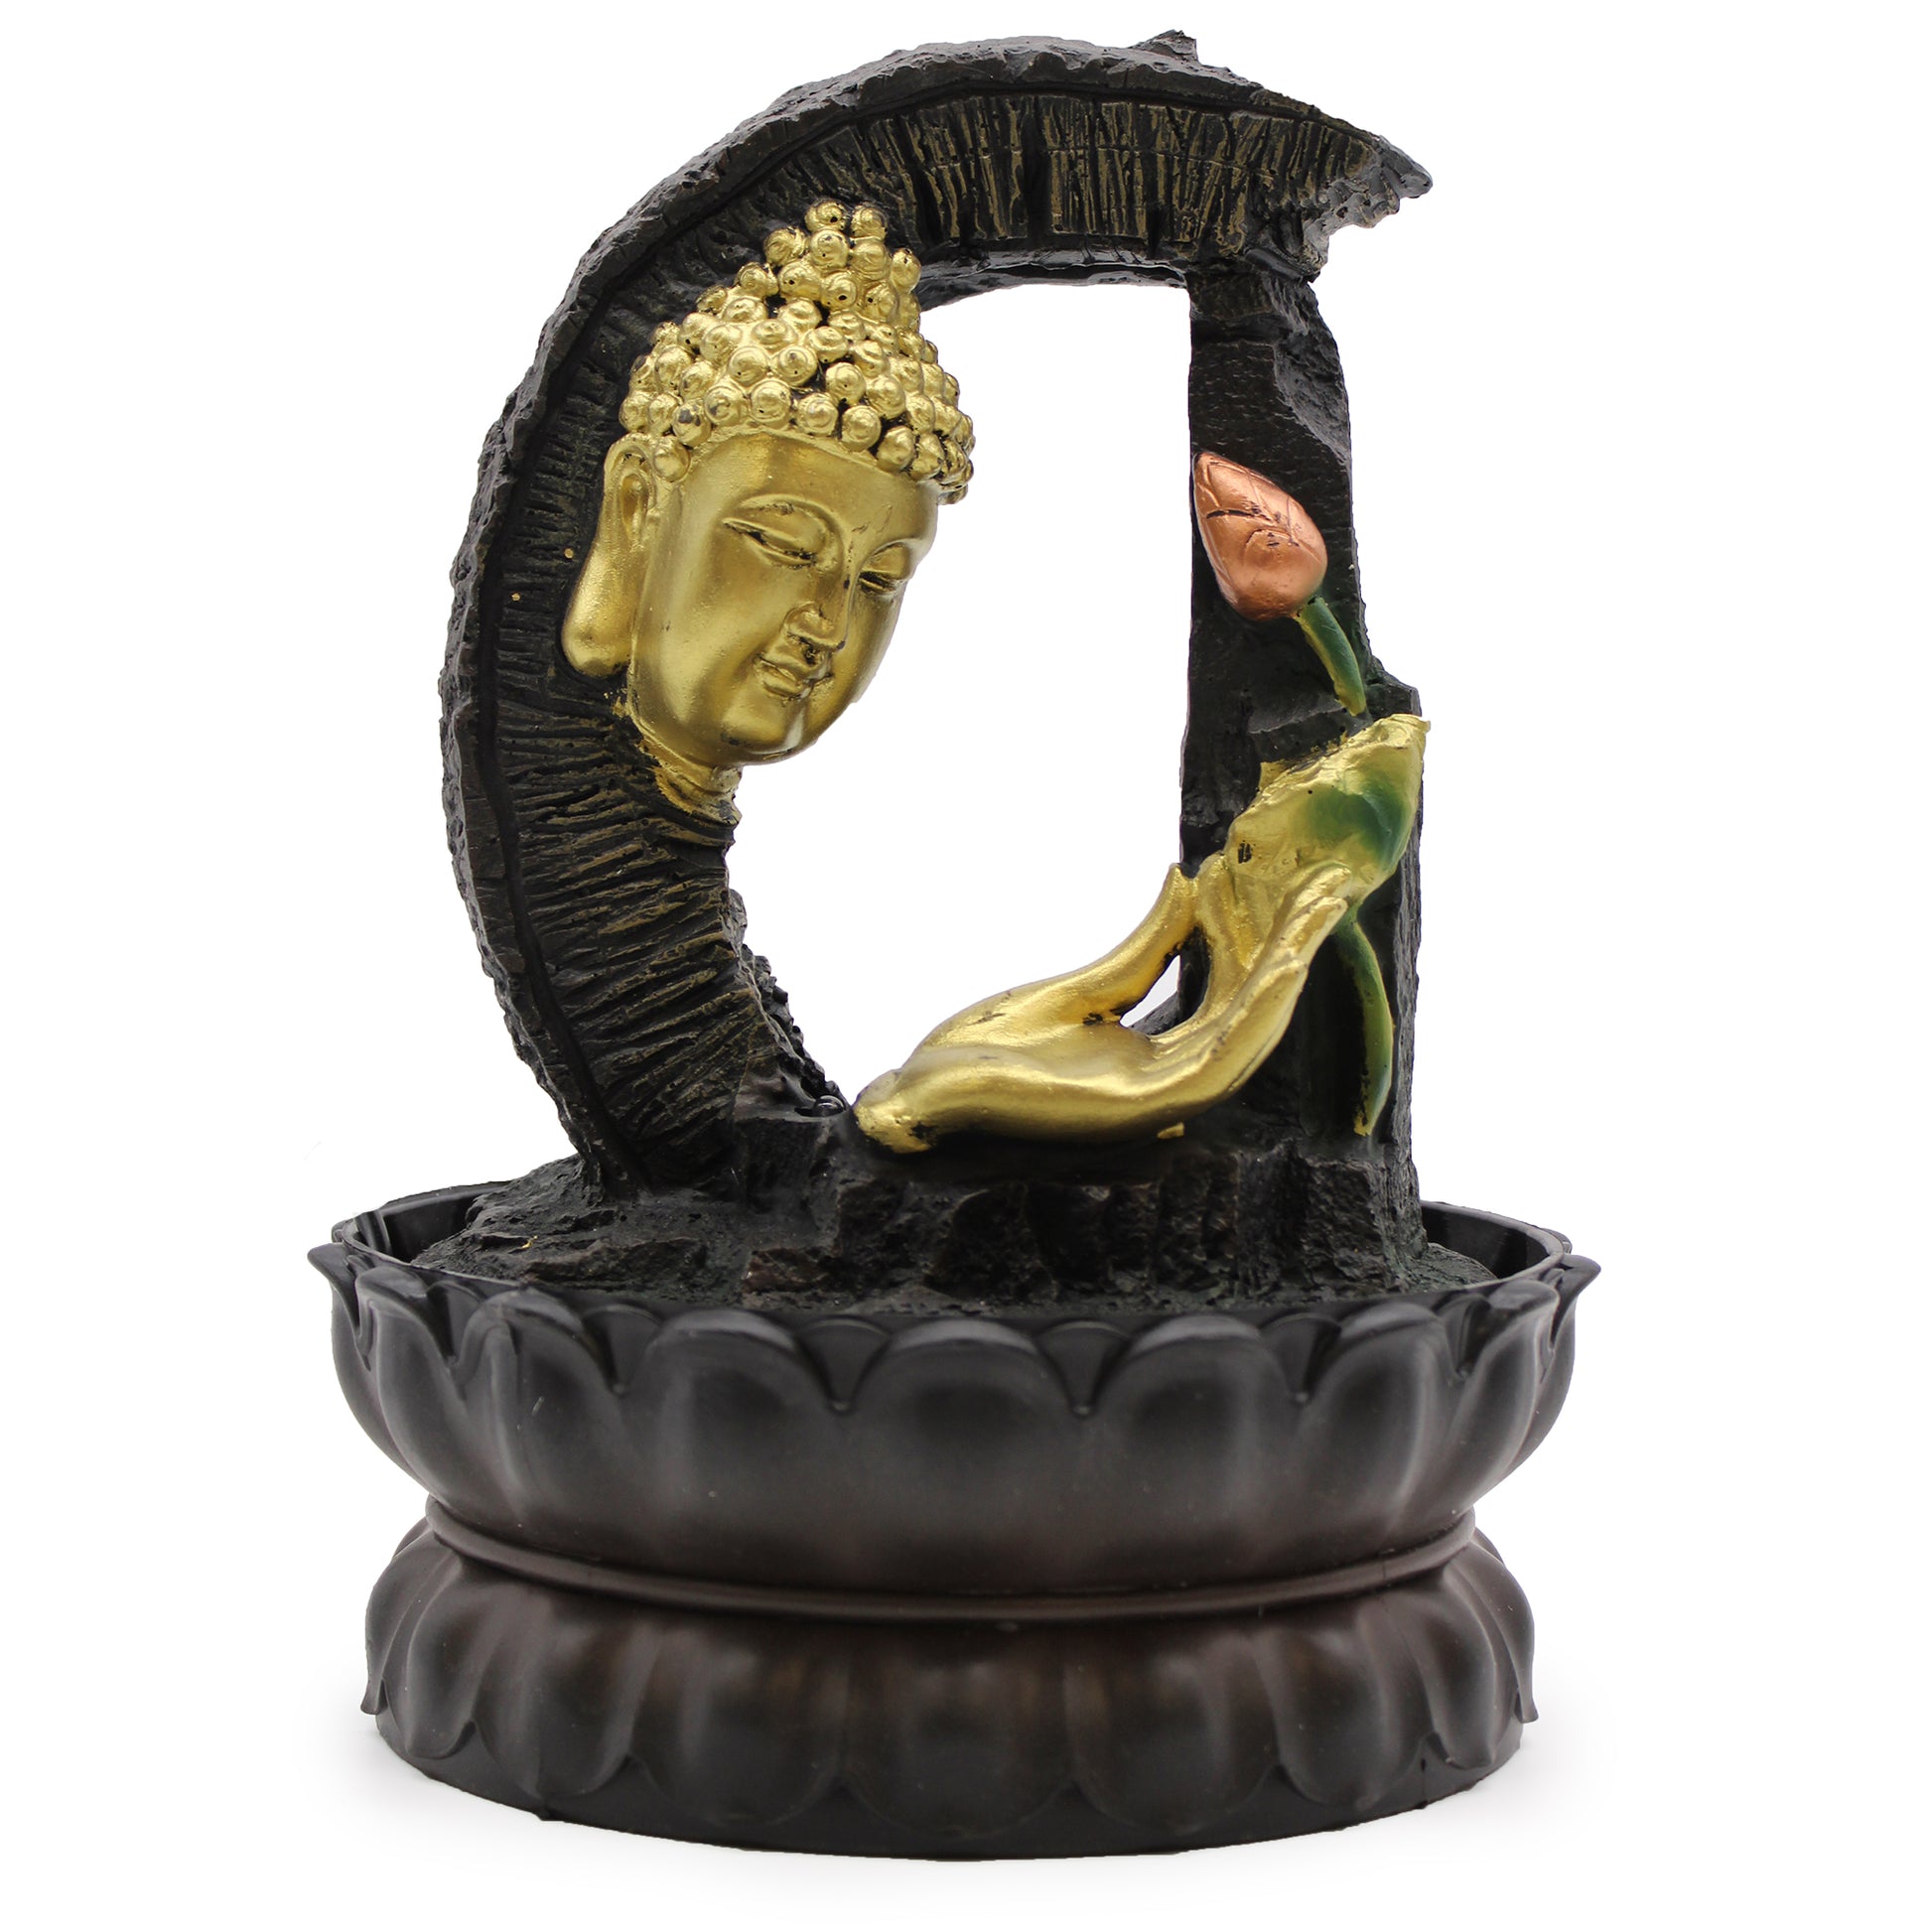 Tabletop Water Feature - 30cm - Golden Buddha & Lotus - Kaftans direct